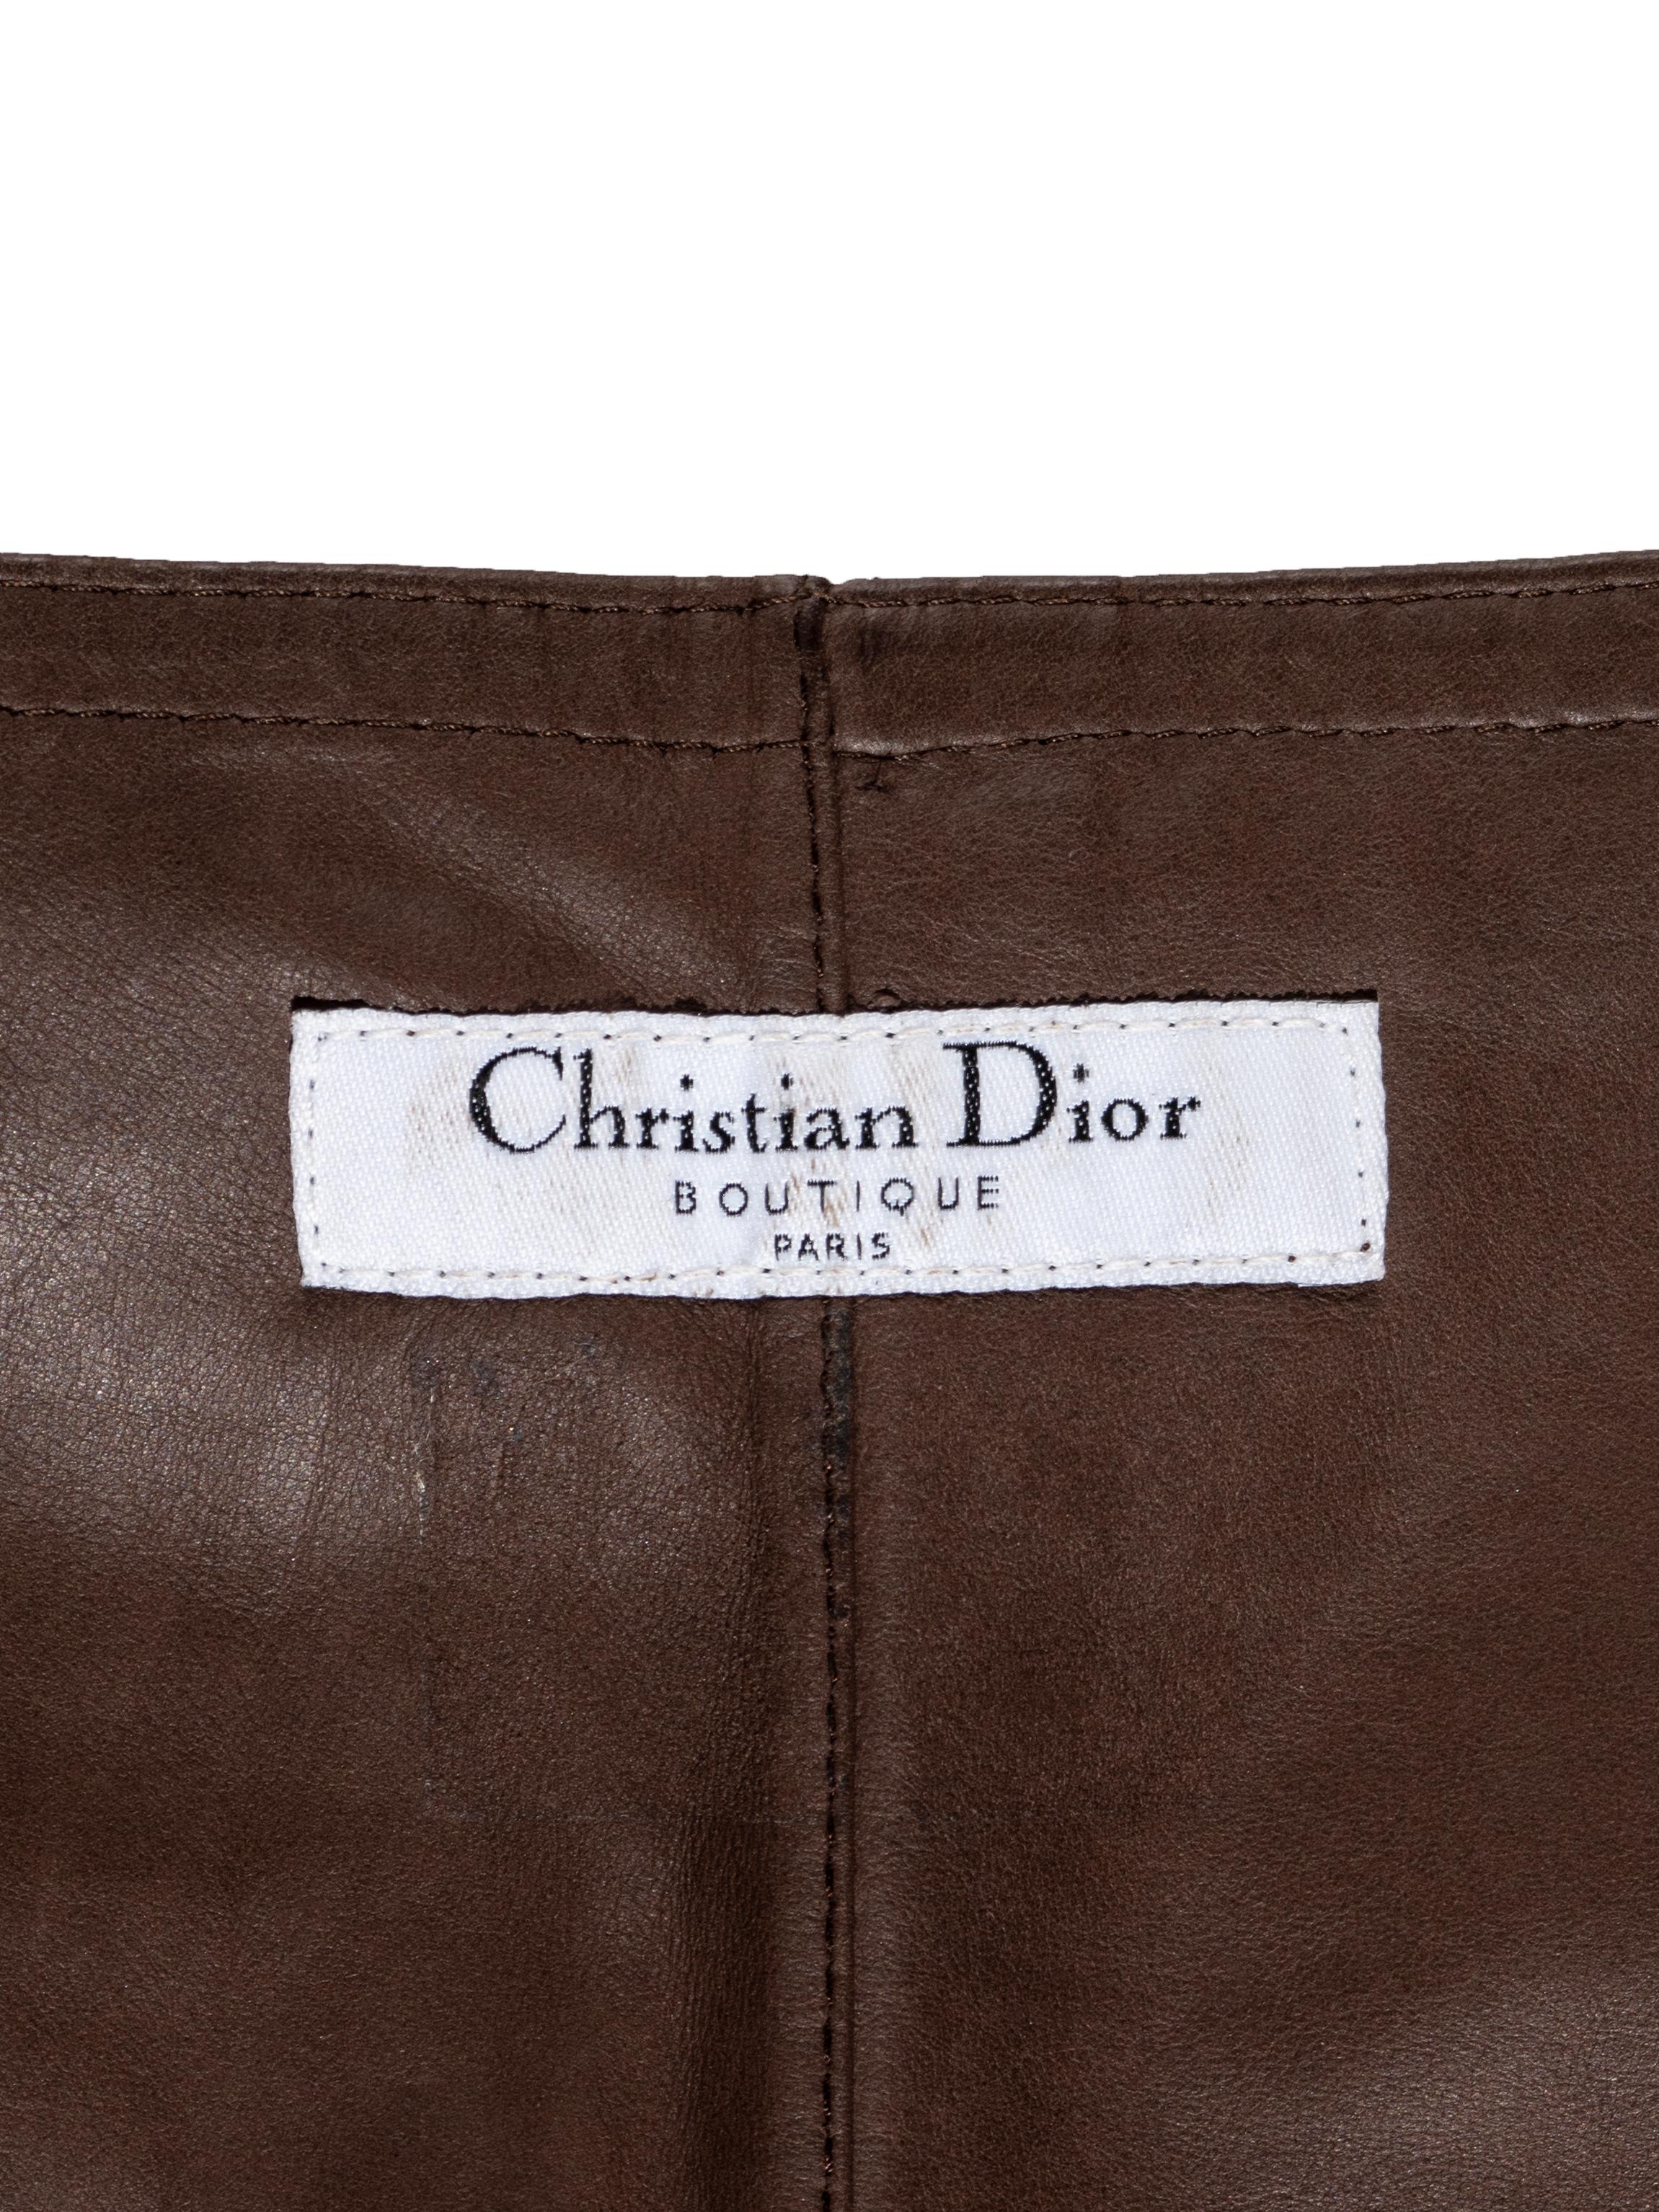 Christian Dior by John Galliano brown leather wrap skirt, ss 2001 5